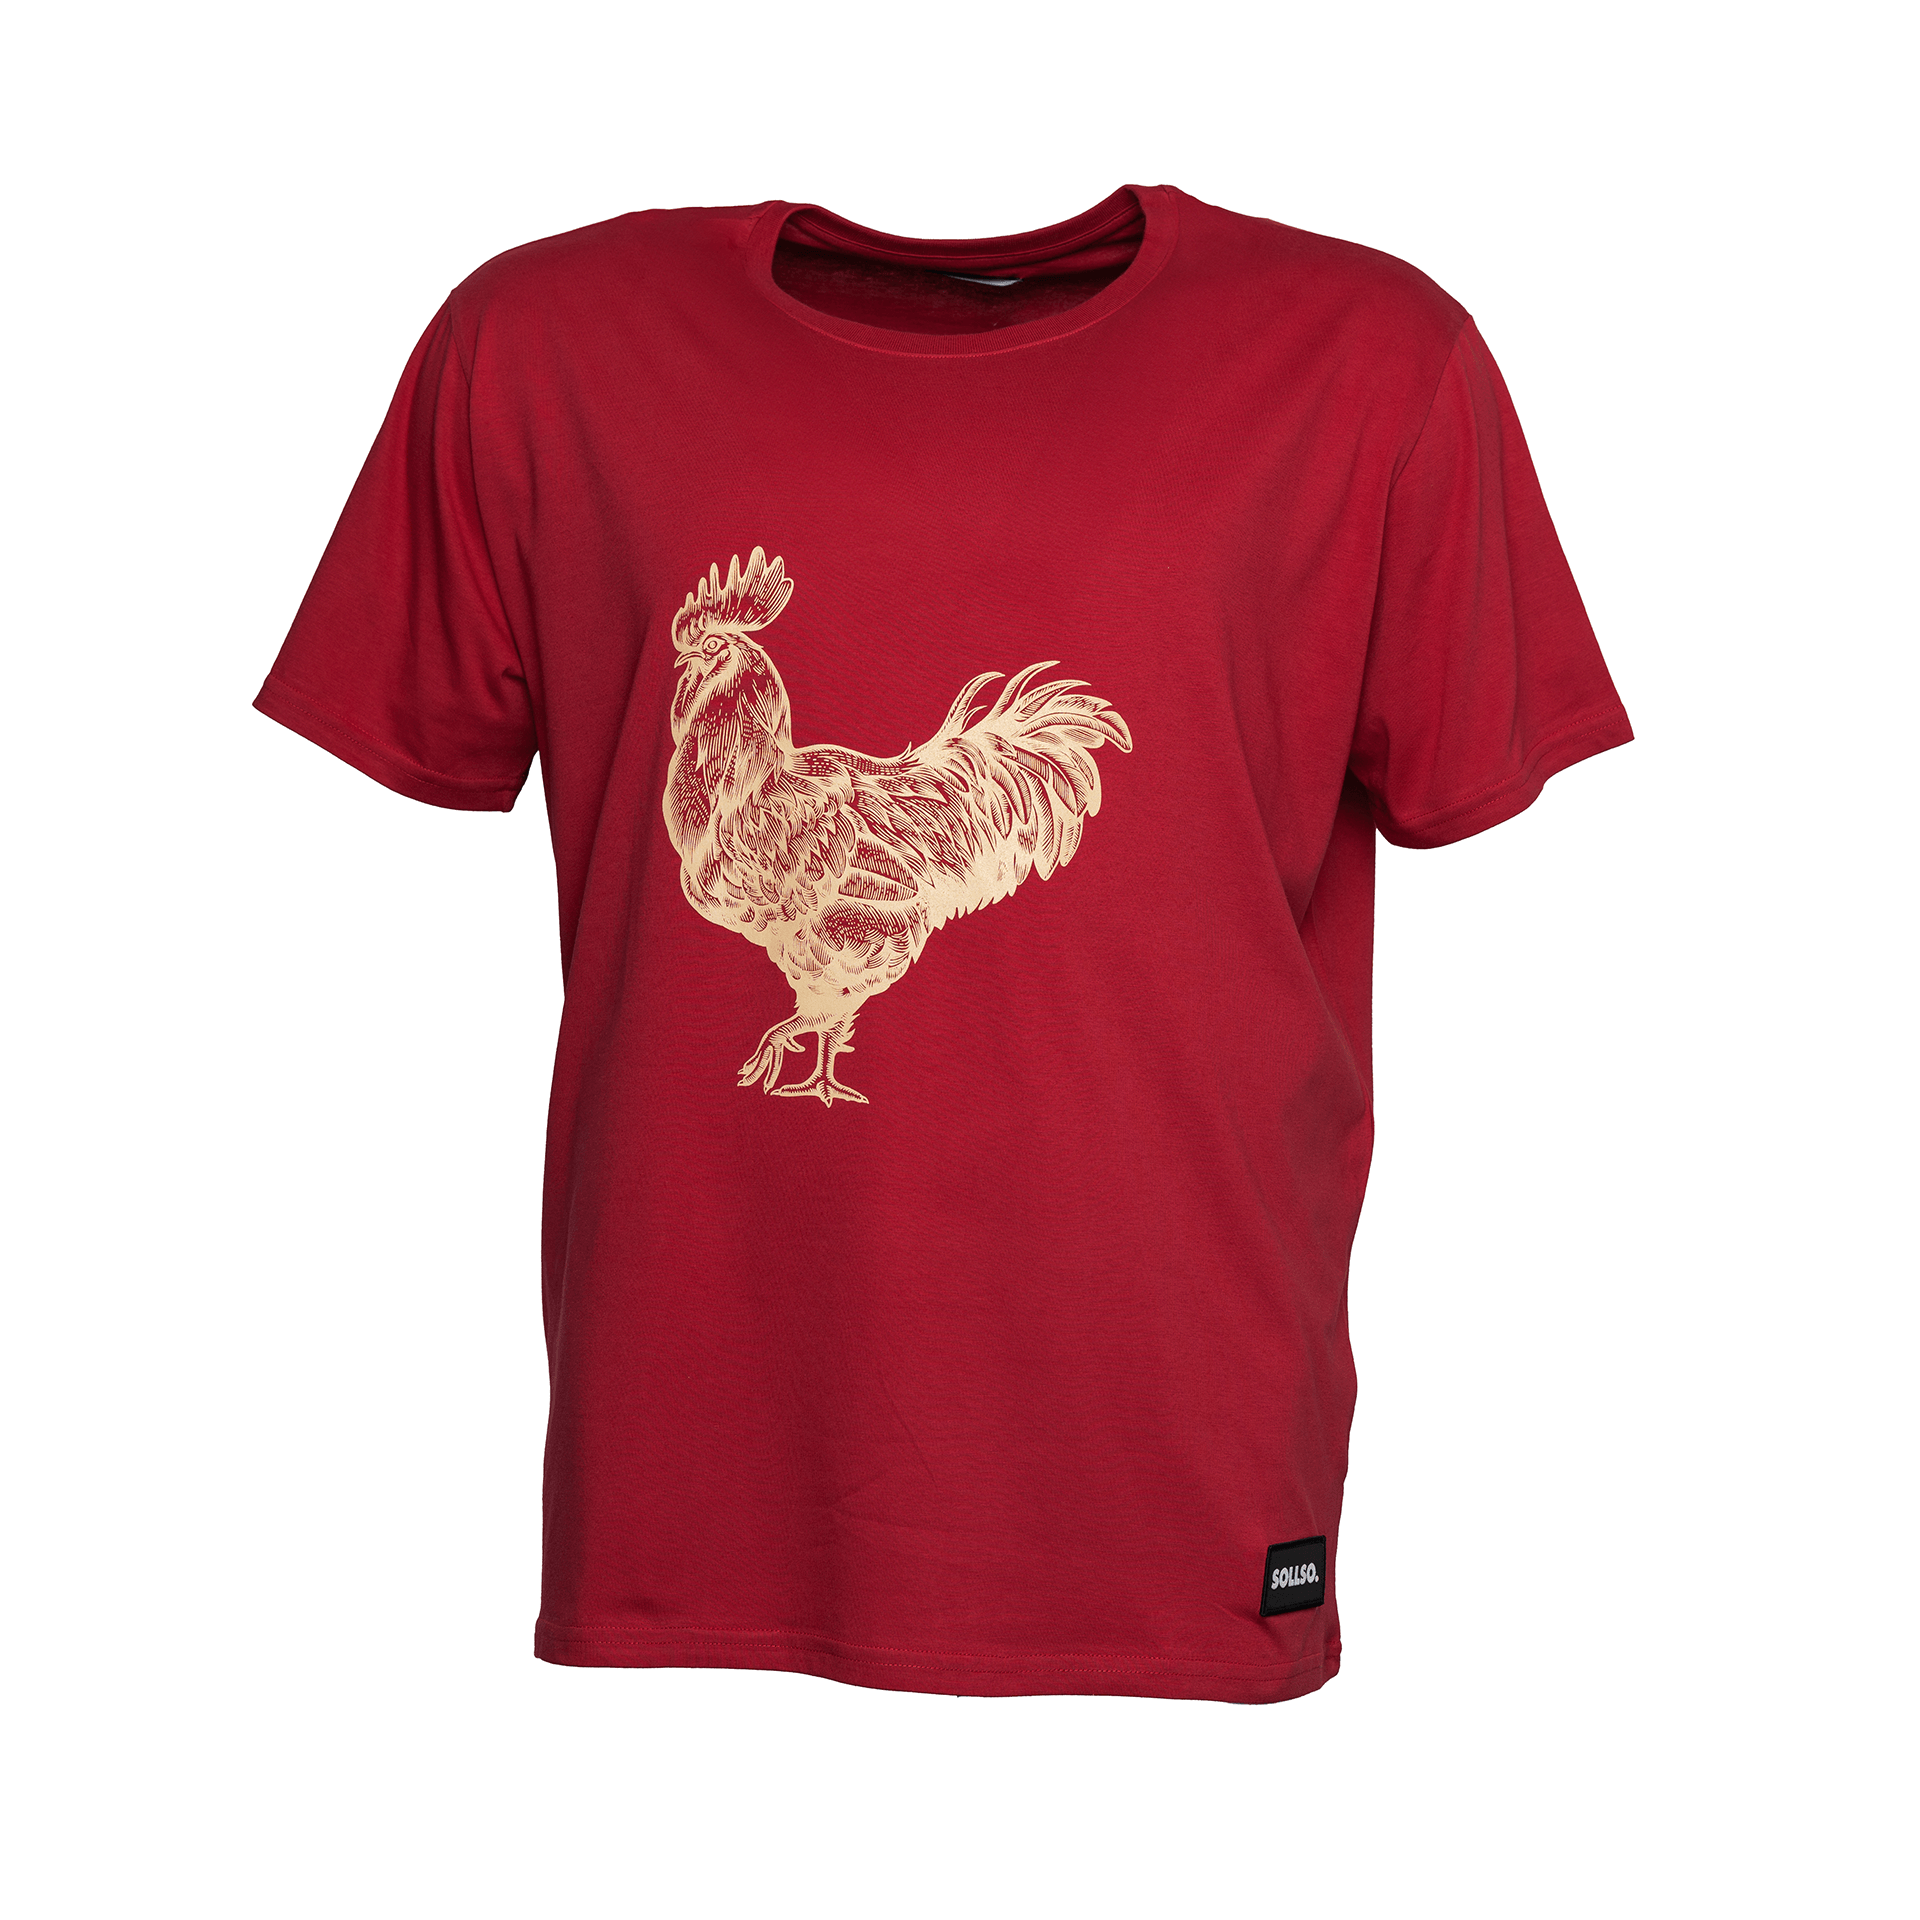 SOLLSO. T-Shirt "Rooster", Farbe Ginger Red, Größe 7XL